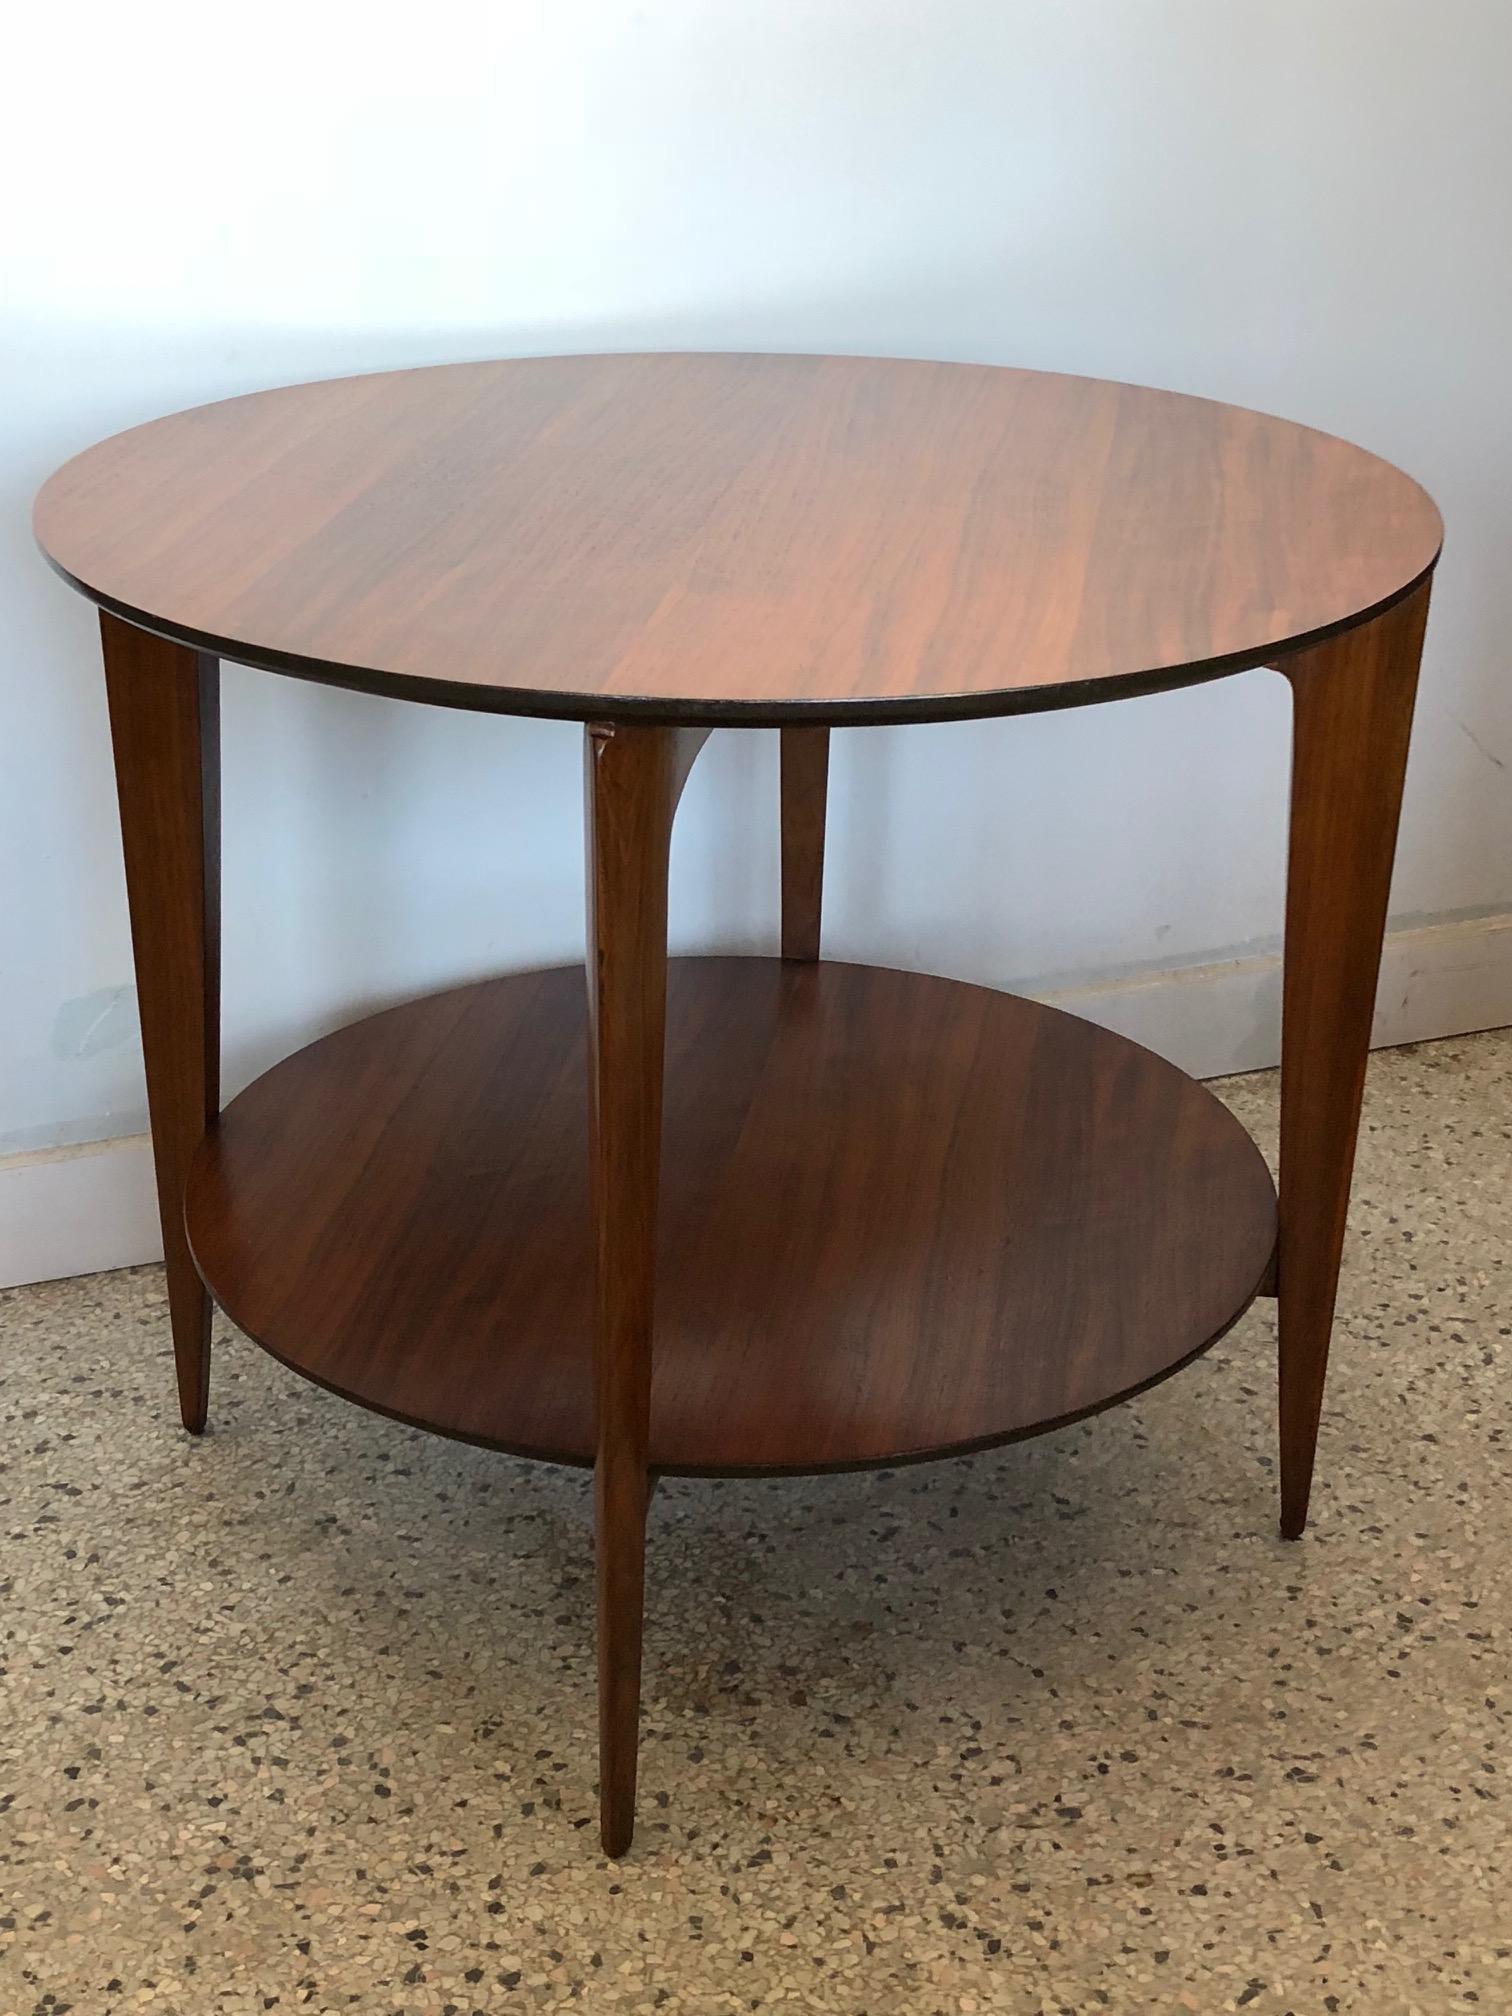 An occasional two-tiered table by Gio Ponti for Singer & Sons, circa 1950s. Manufactured in Italy by Giordano Chiesa this table is well documented in the G.Ponti archives and 